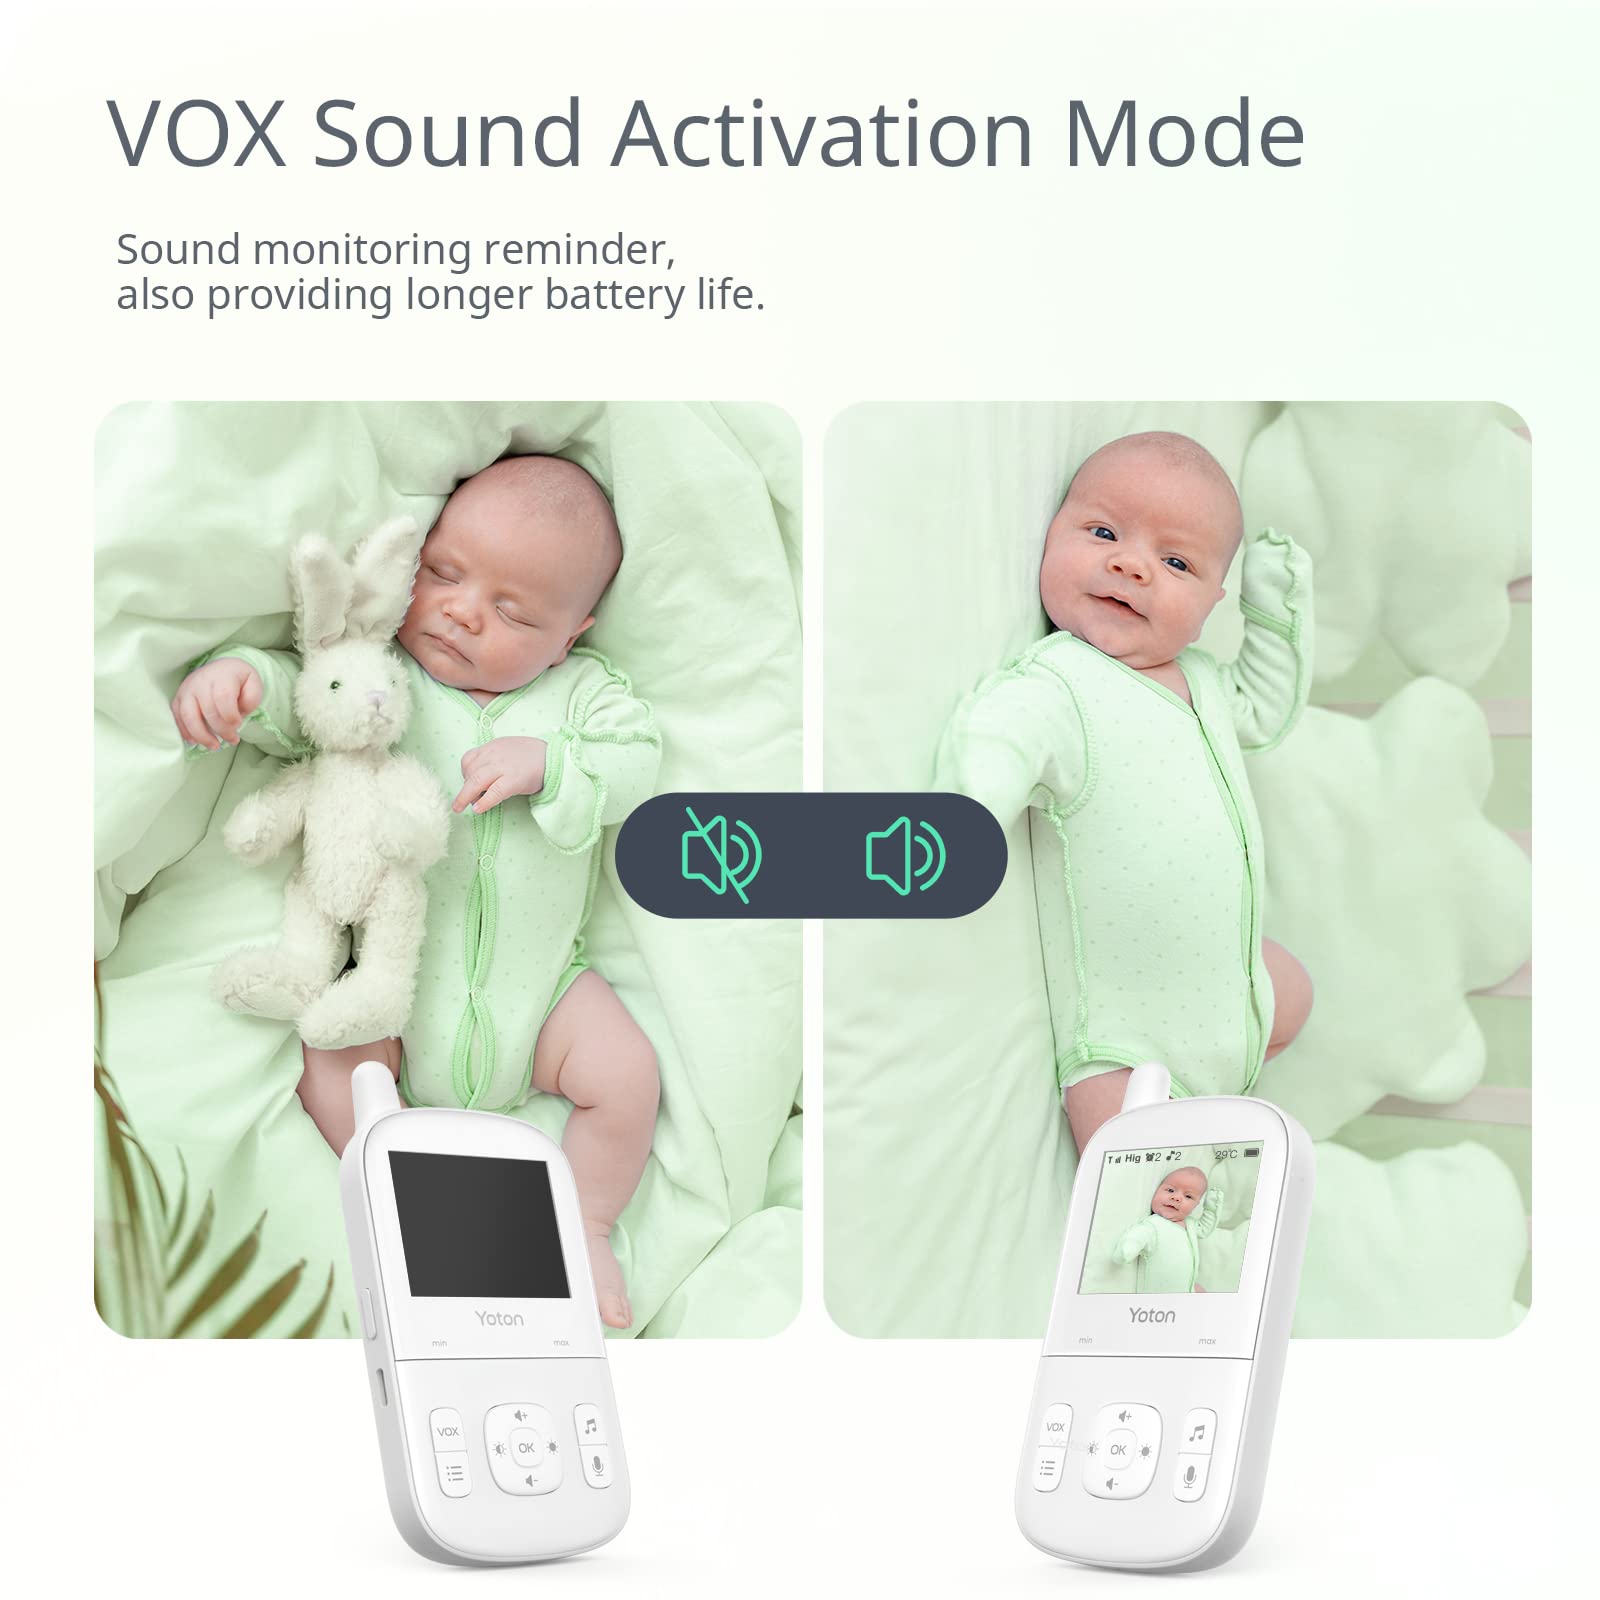 yoton YM04 portable baby monitor vox sound activation mode